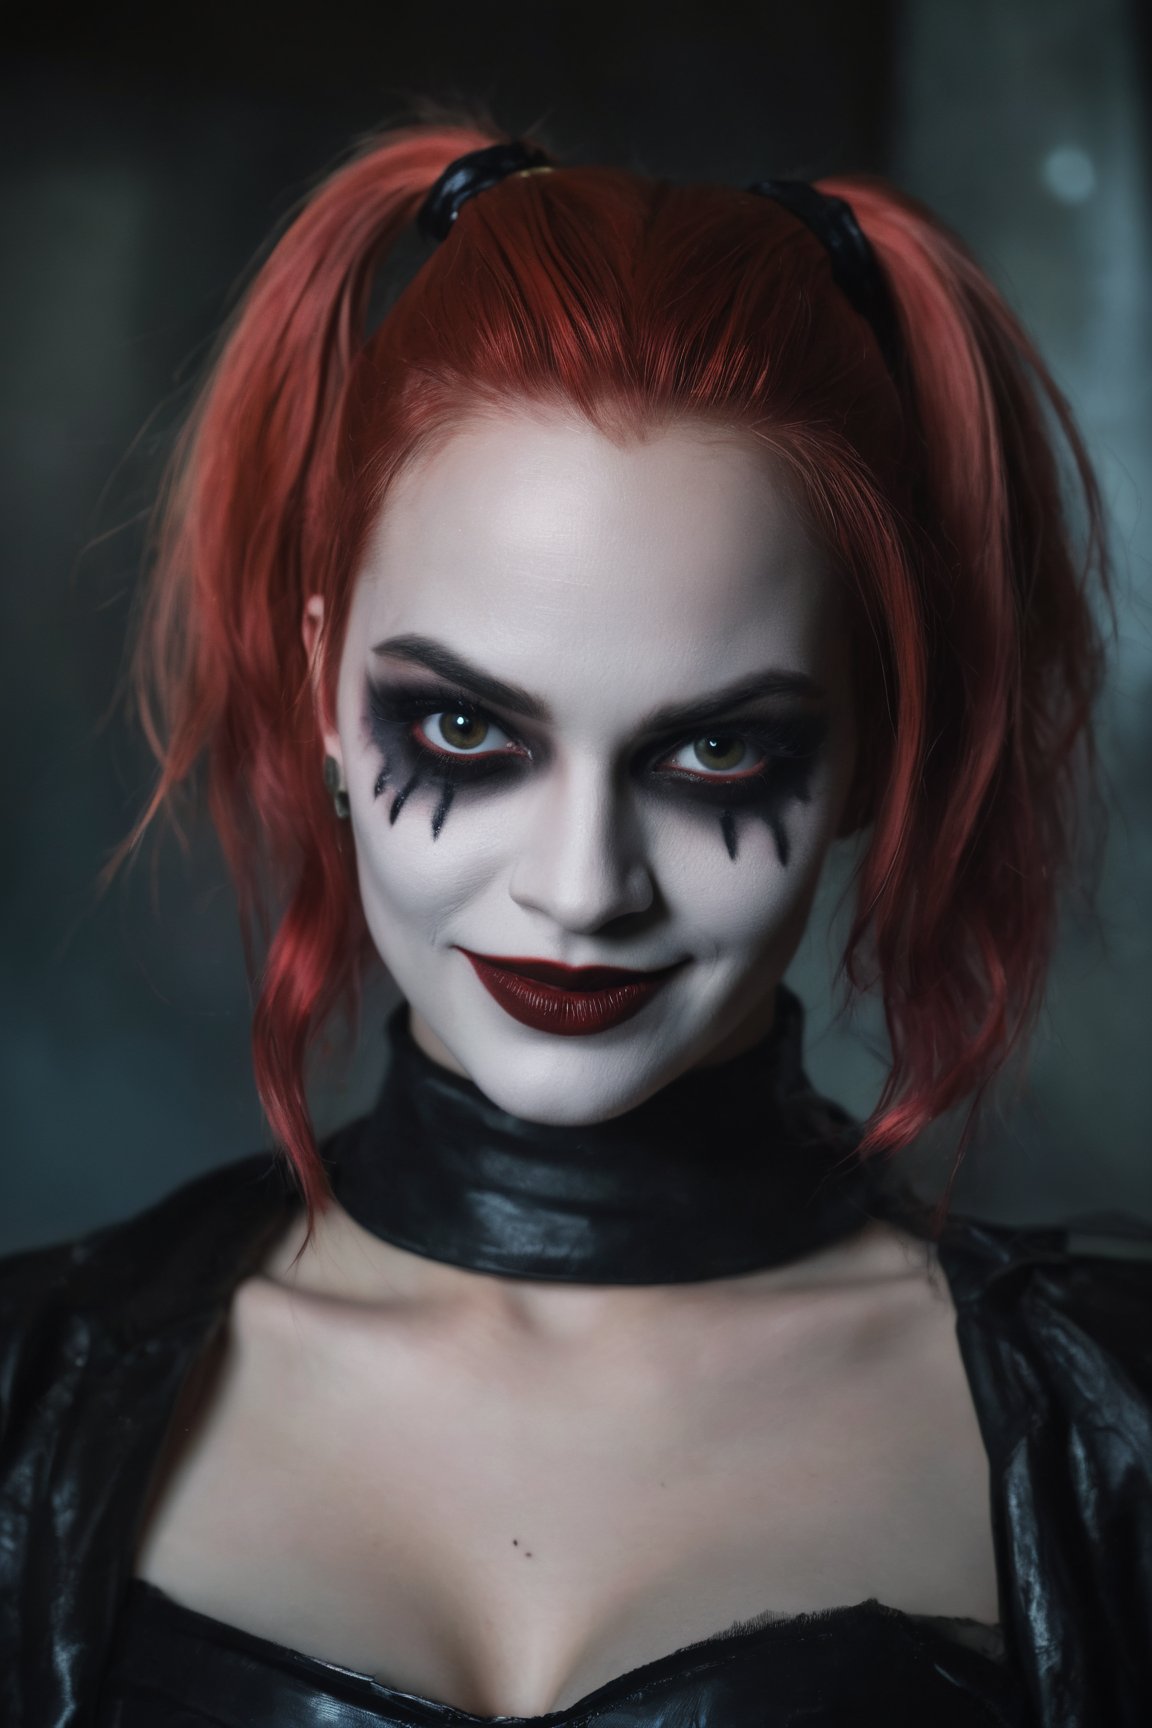 (best quality,4k,8k,highres,masterpiece:1.2),ultra-detailed,(realistic,photorealistic,photo-realistic:1.37),dark evil style,Harley Quinn,fantasy,creepy look,creepy smile,portrait,gloomy atmosphere,distorted make-up,dark clothing,menacing eyes,smudged lipstick,gothic setting,ominous lighting,gritty details,sinister expression,shadowy background,hauntingly beautiful features,macabre vibe,unsettling charm,ominous color palette,sharp contrast,menacing gaze,sinister grin,evil intentions,untamed hair,fiery red and black hair,piercing eyes,vividly dark colors